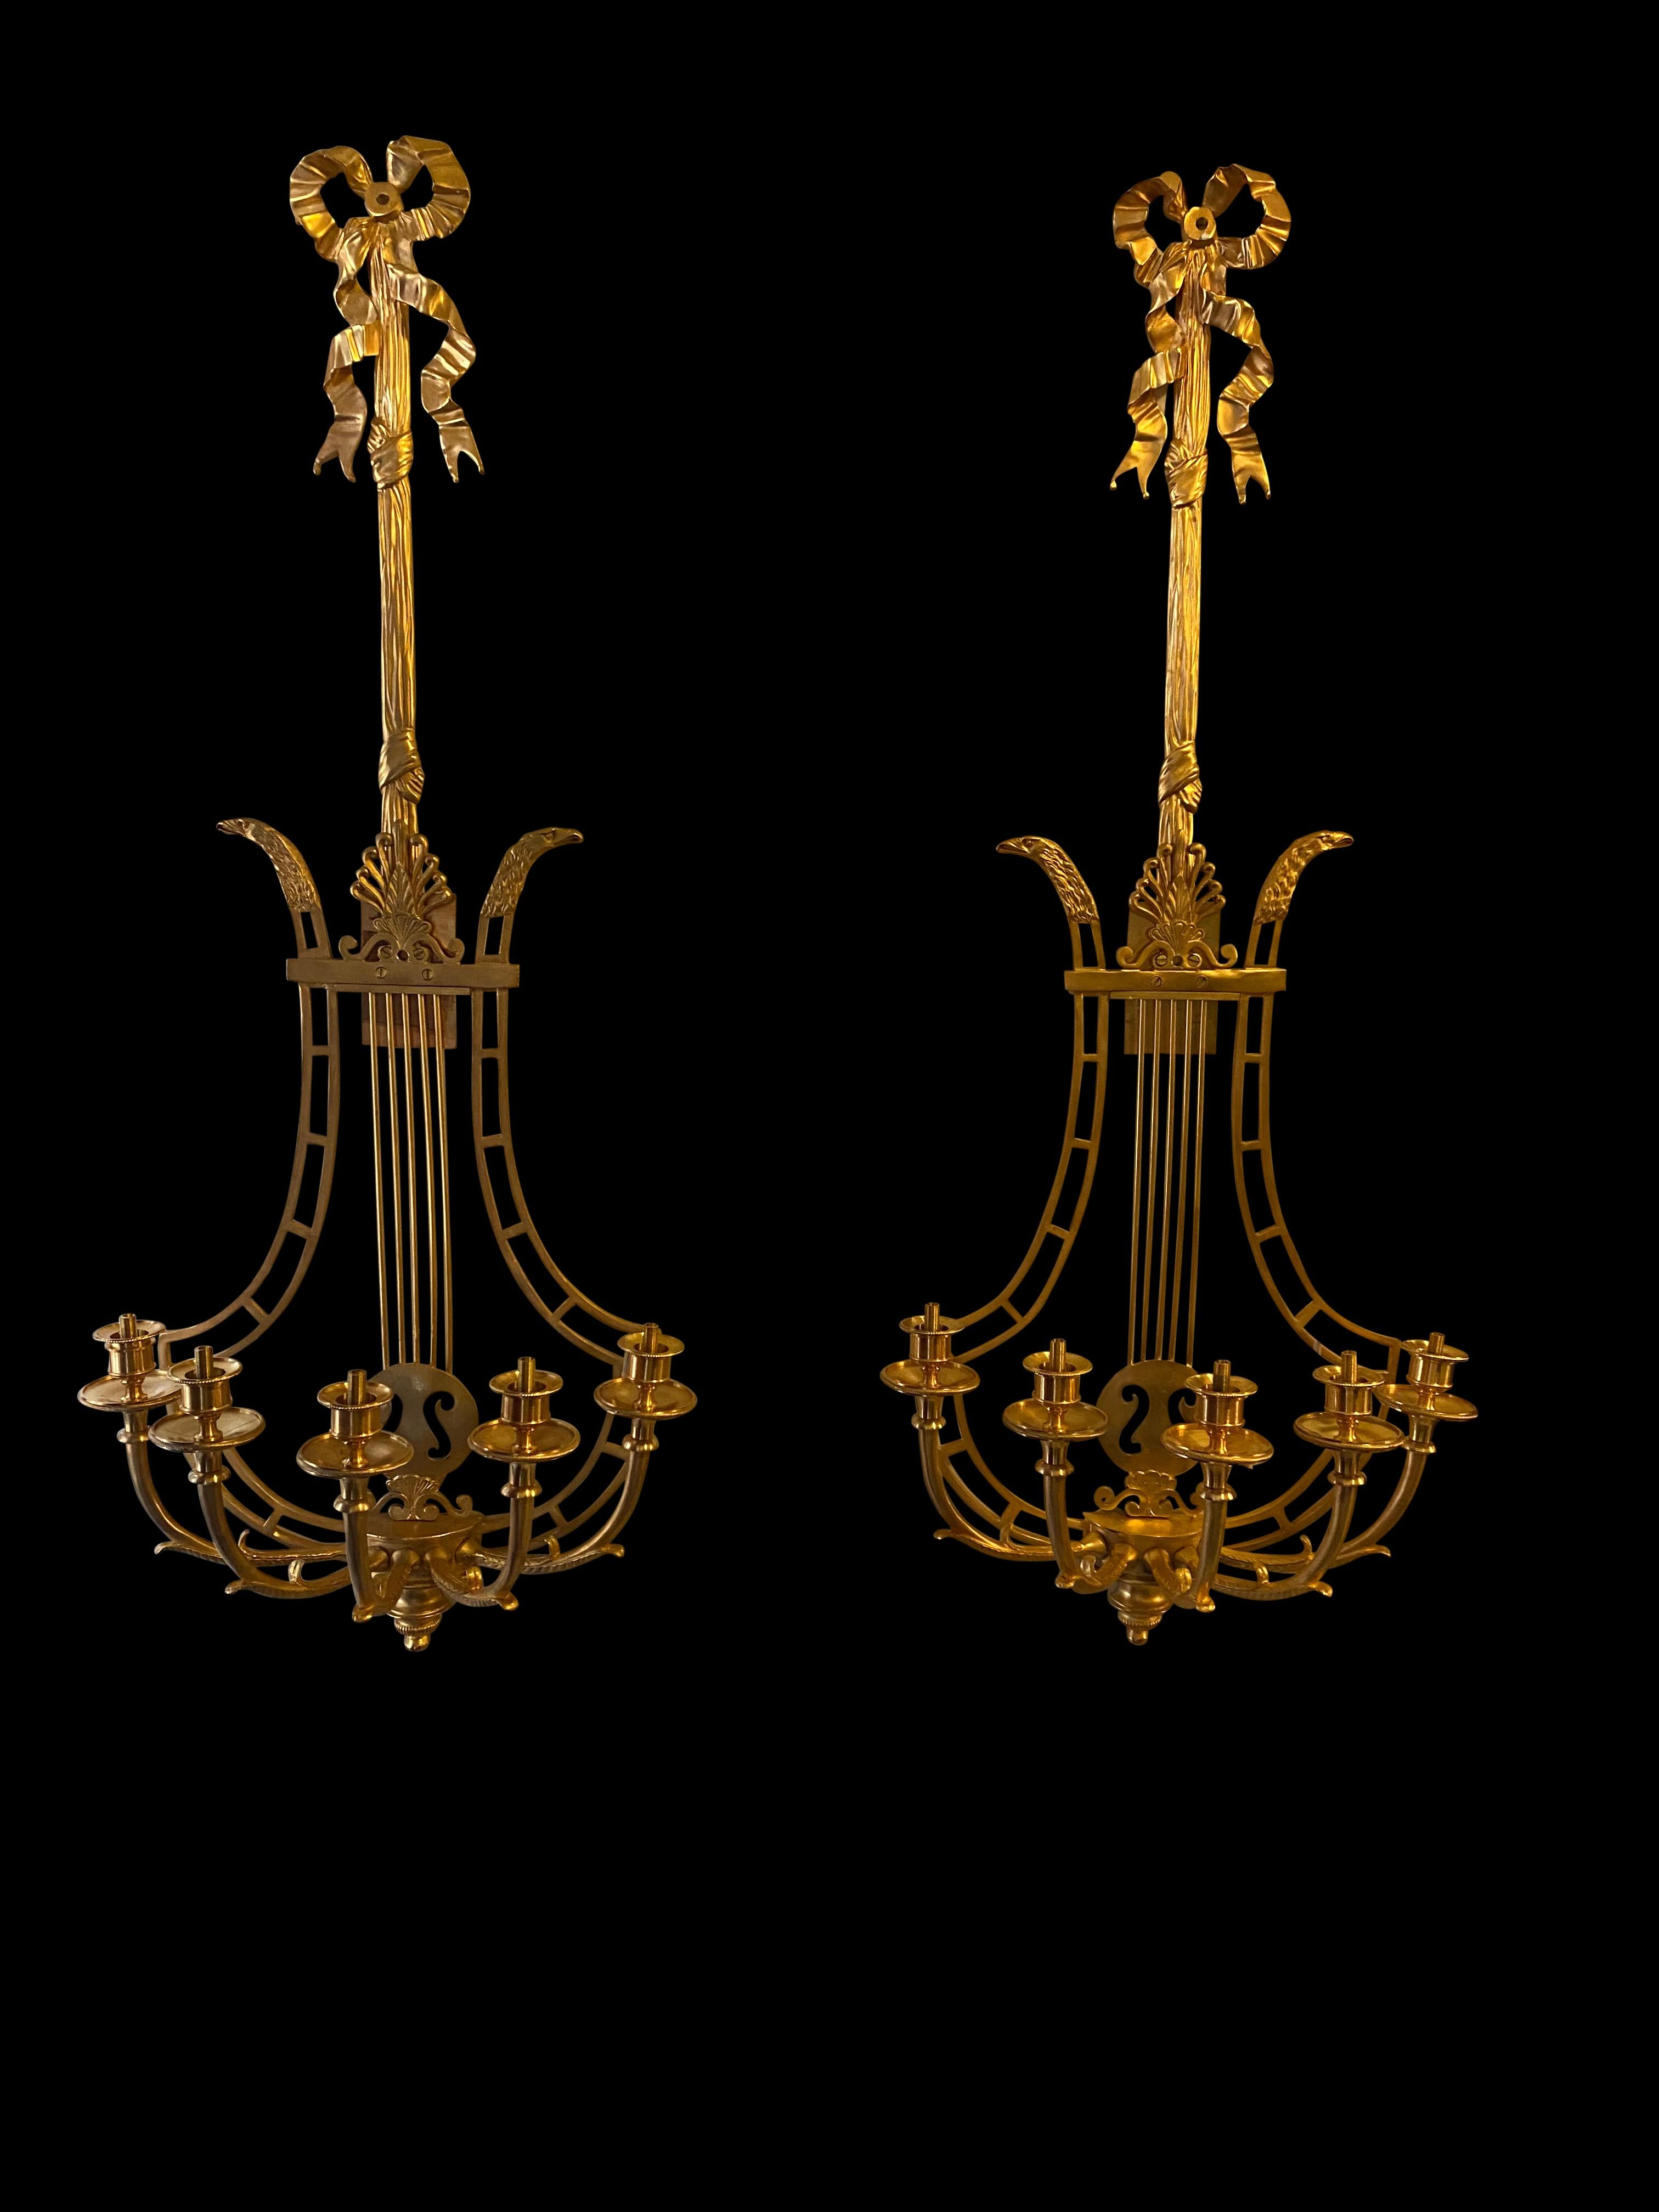 Empire sconces, French ormolu wall light candelabras Lyre, 20th century. Taking the form of a lyre, these really would add style to any room or interior. Good size at over three feet tall - 93 CM. Long hanging surmounted by ribbon.